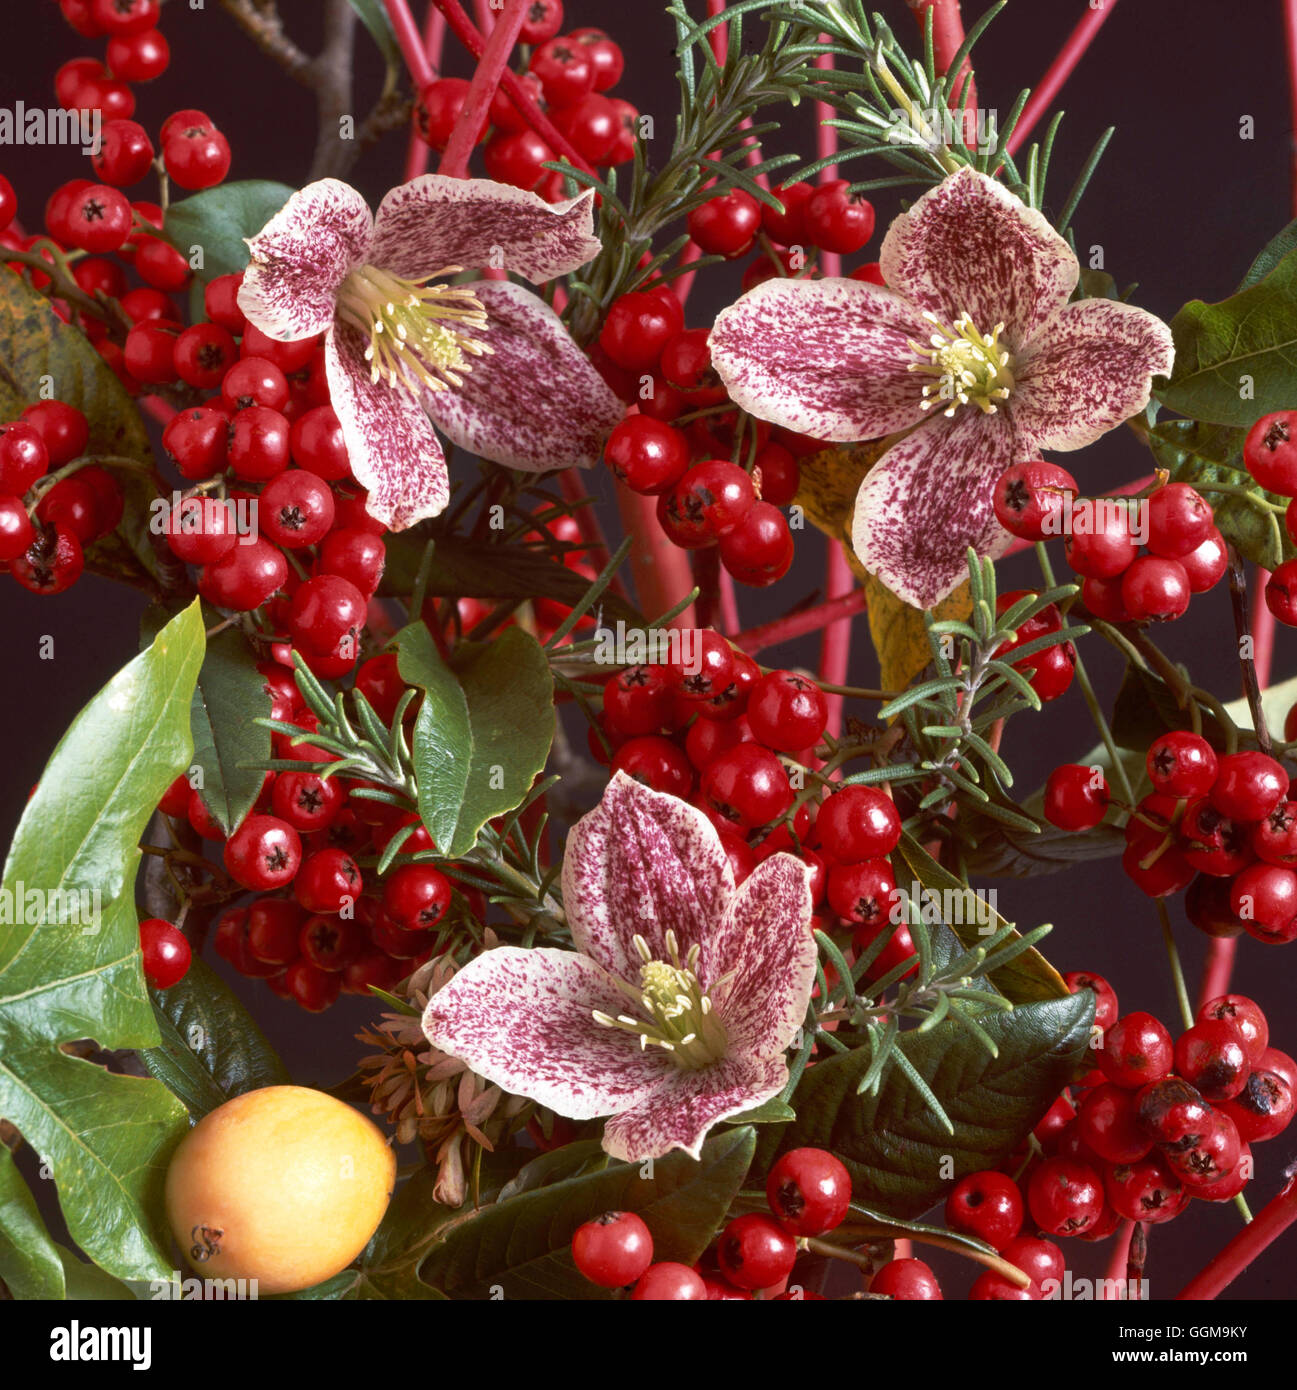 Winter Flowers - December collection - Clematis cirrhosa `Freckles' Cornus stems  Rosemary  Fatsia  Abelia and berries of Malus Stock Photo